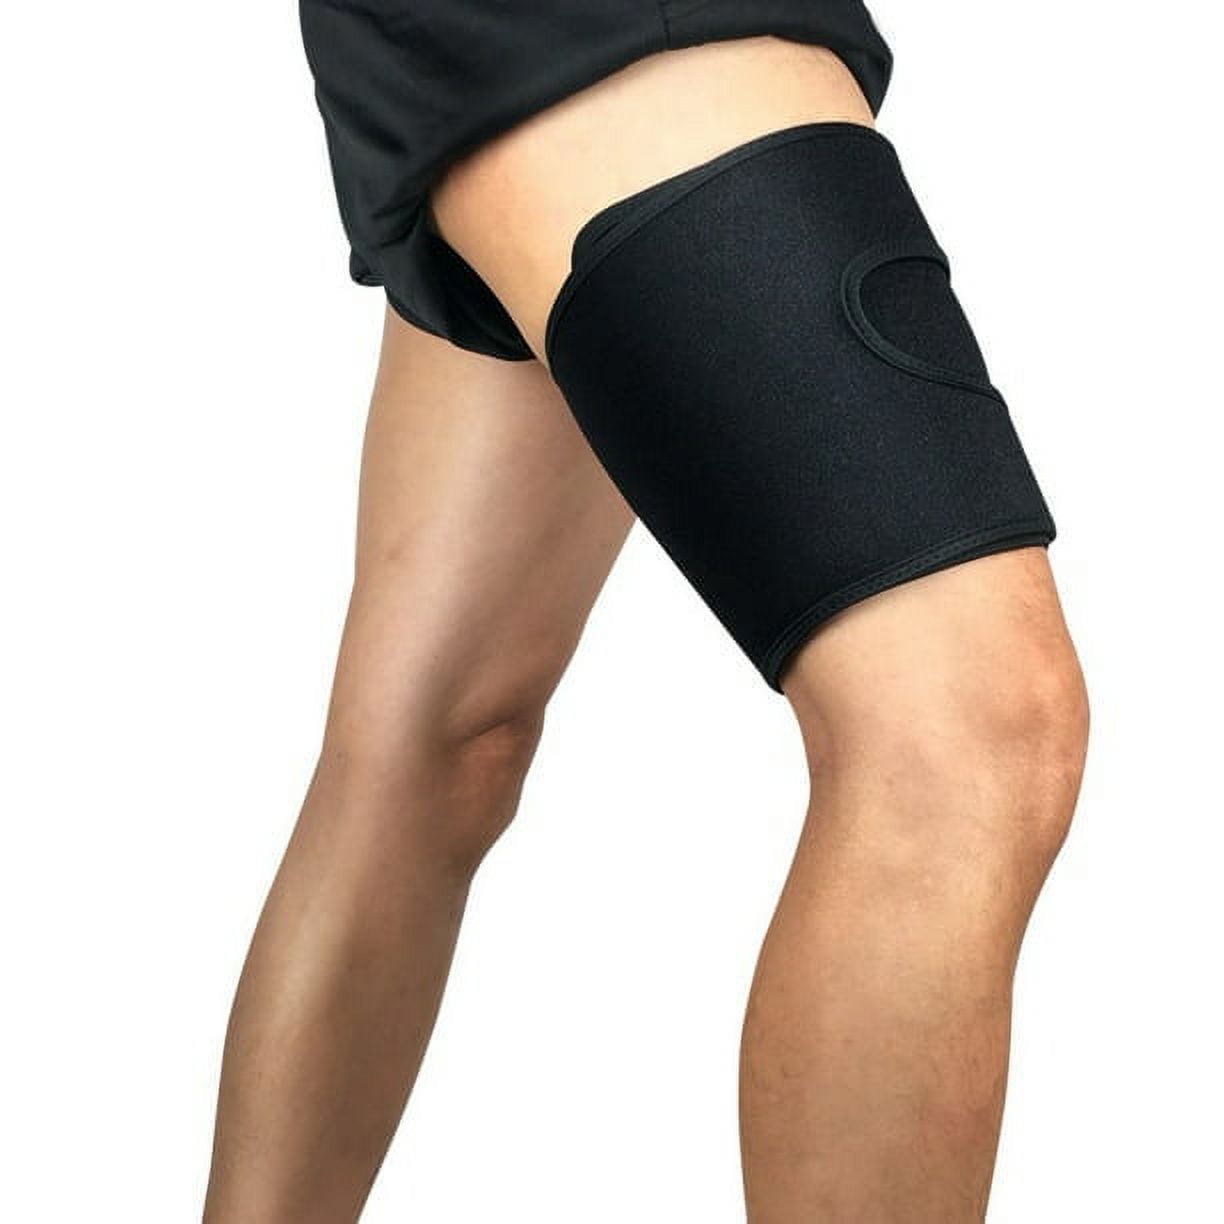 Thigh Brace - Hamstring Quad Wrap - Adjustable Compression Sleeve Support  for Pulled Groin Muscle, Sprains, Quadricep, Tendinitis, Workouts,  Cellulite Slimmer, Sports Injury Recovery - Men, Women 